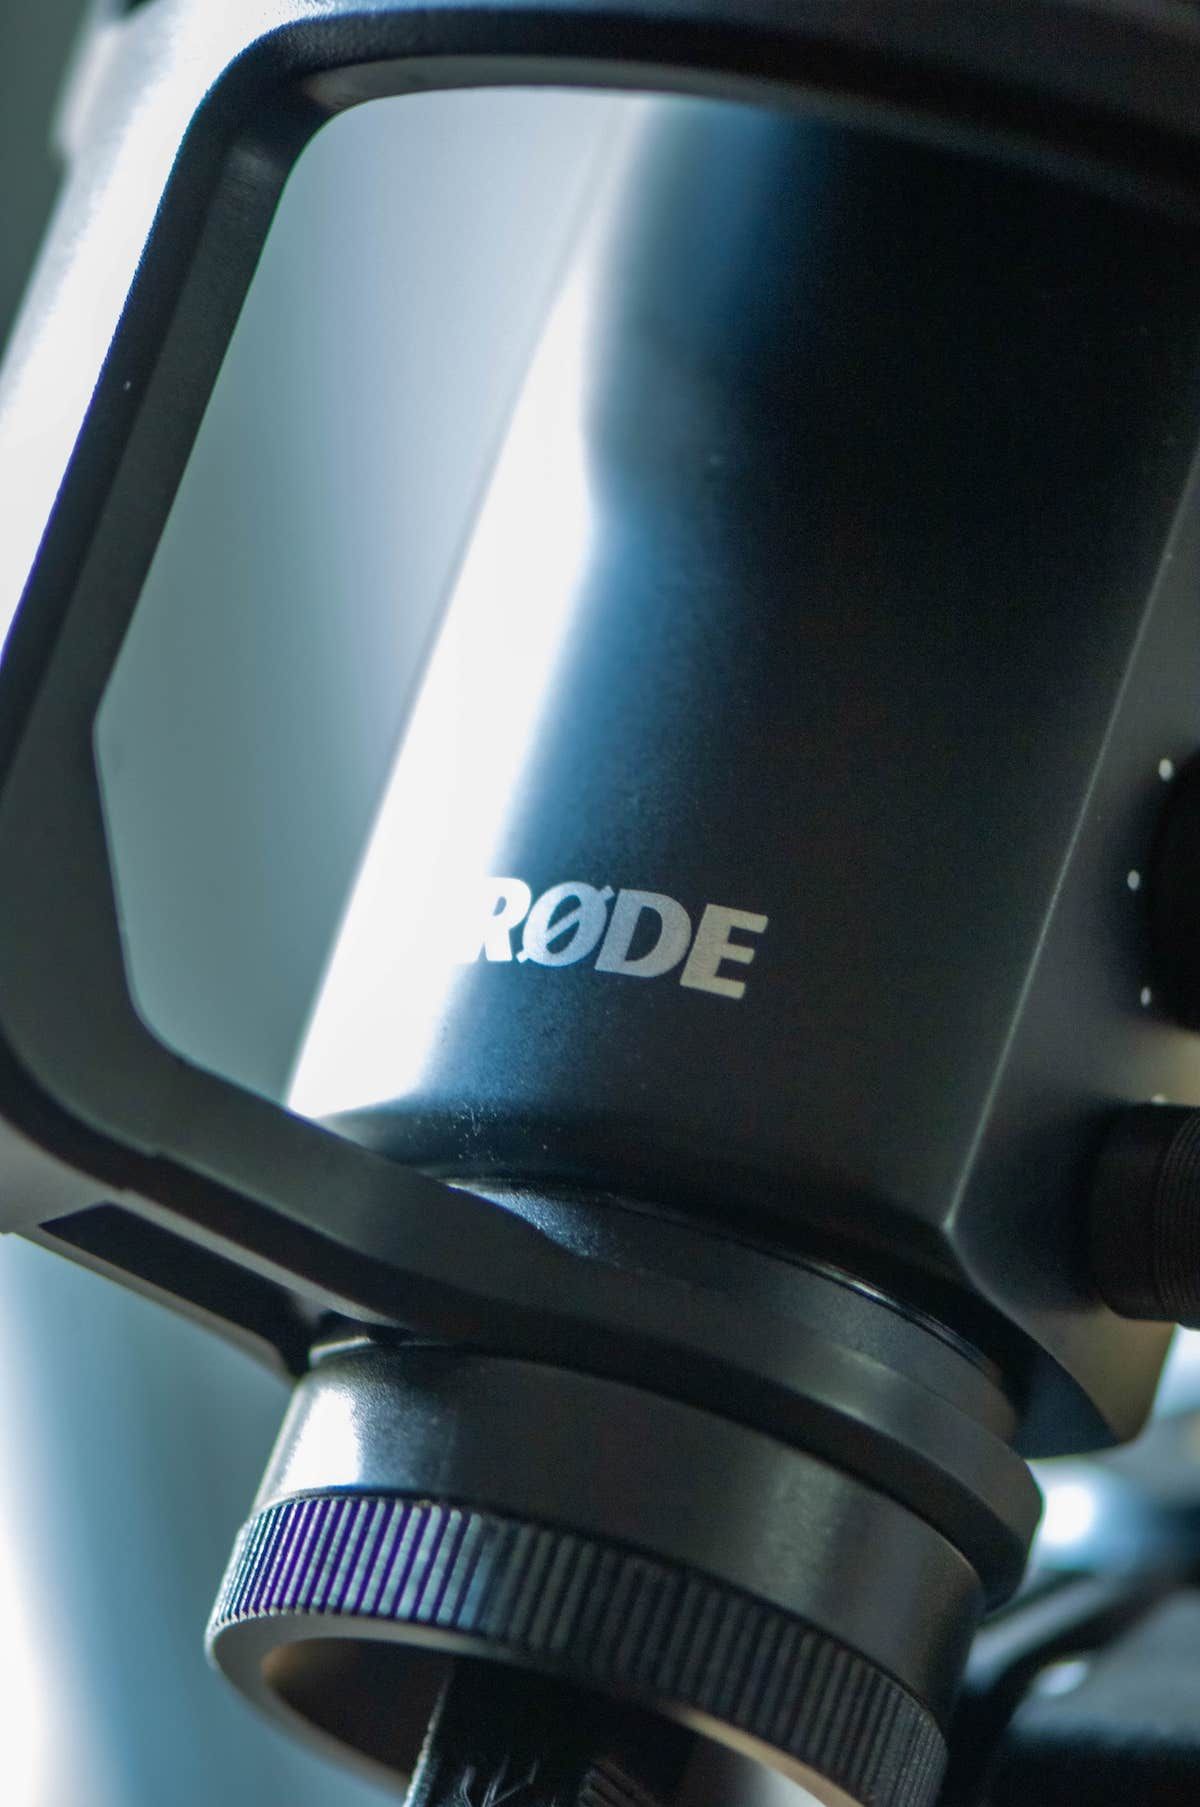 Features in a RØDE microphone